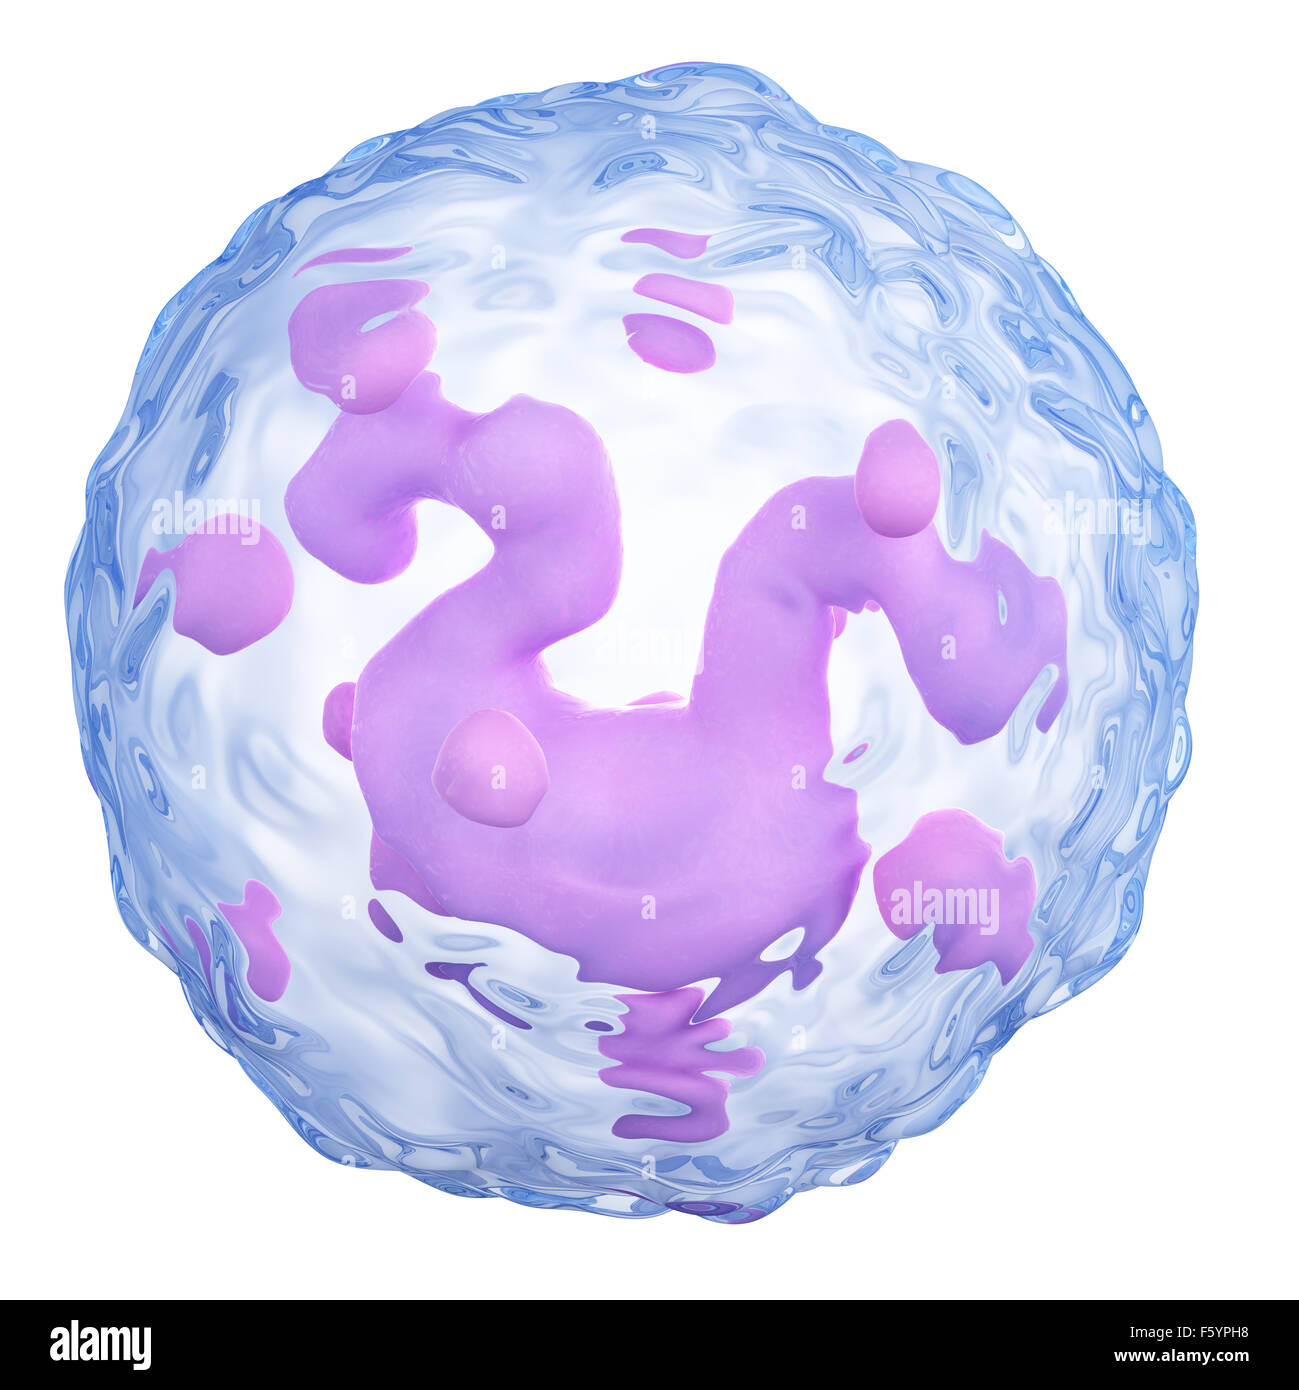 medically accurate illustration of a basophil Stock Photo